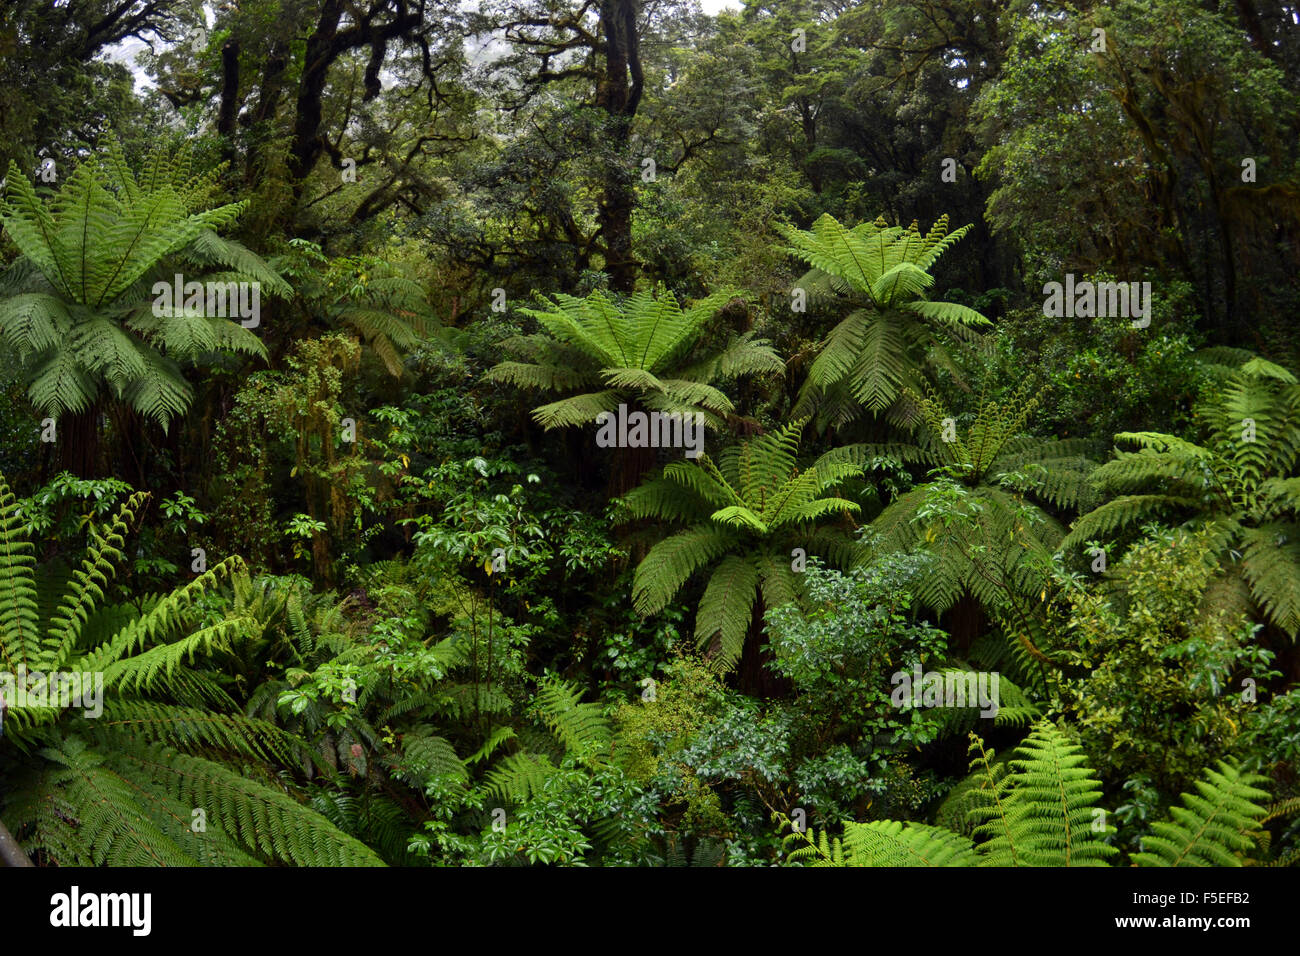 Fern forest at 'The Chasm', Milford Sound, Fiordland National Park, South Island, New Zealand Stock Photo